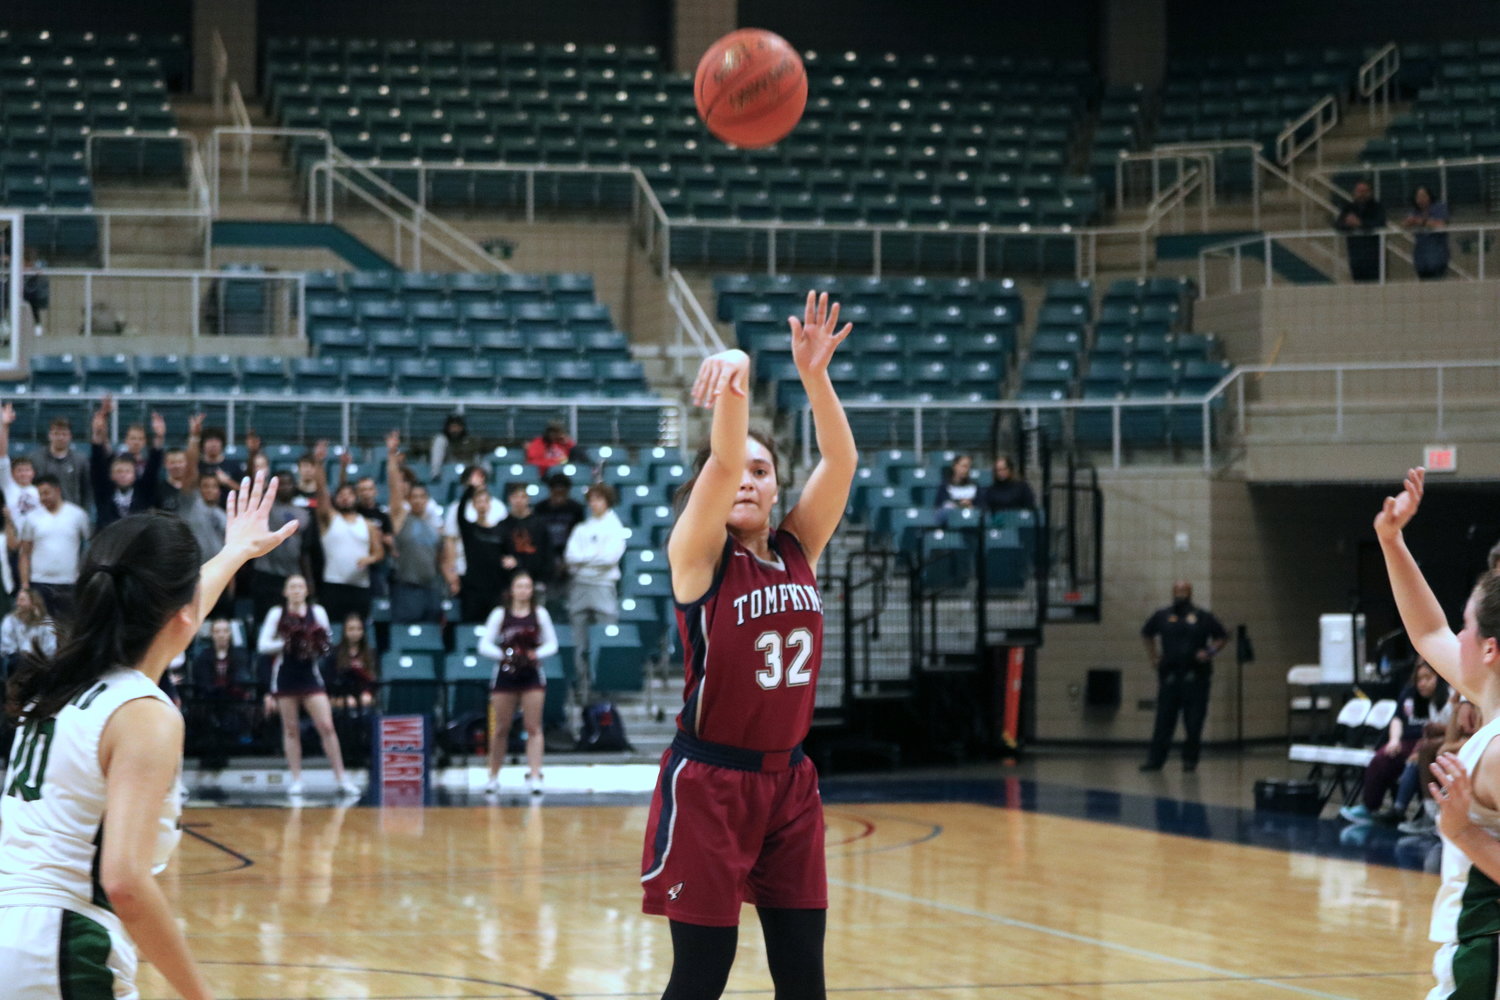 Rihanna DeLeon shoots a three pointer during Friday’s game between Tompkins and Stratford at the Merrell Center.